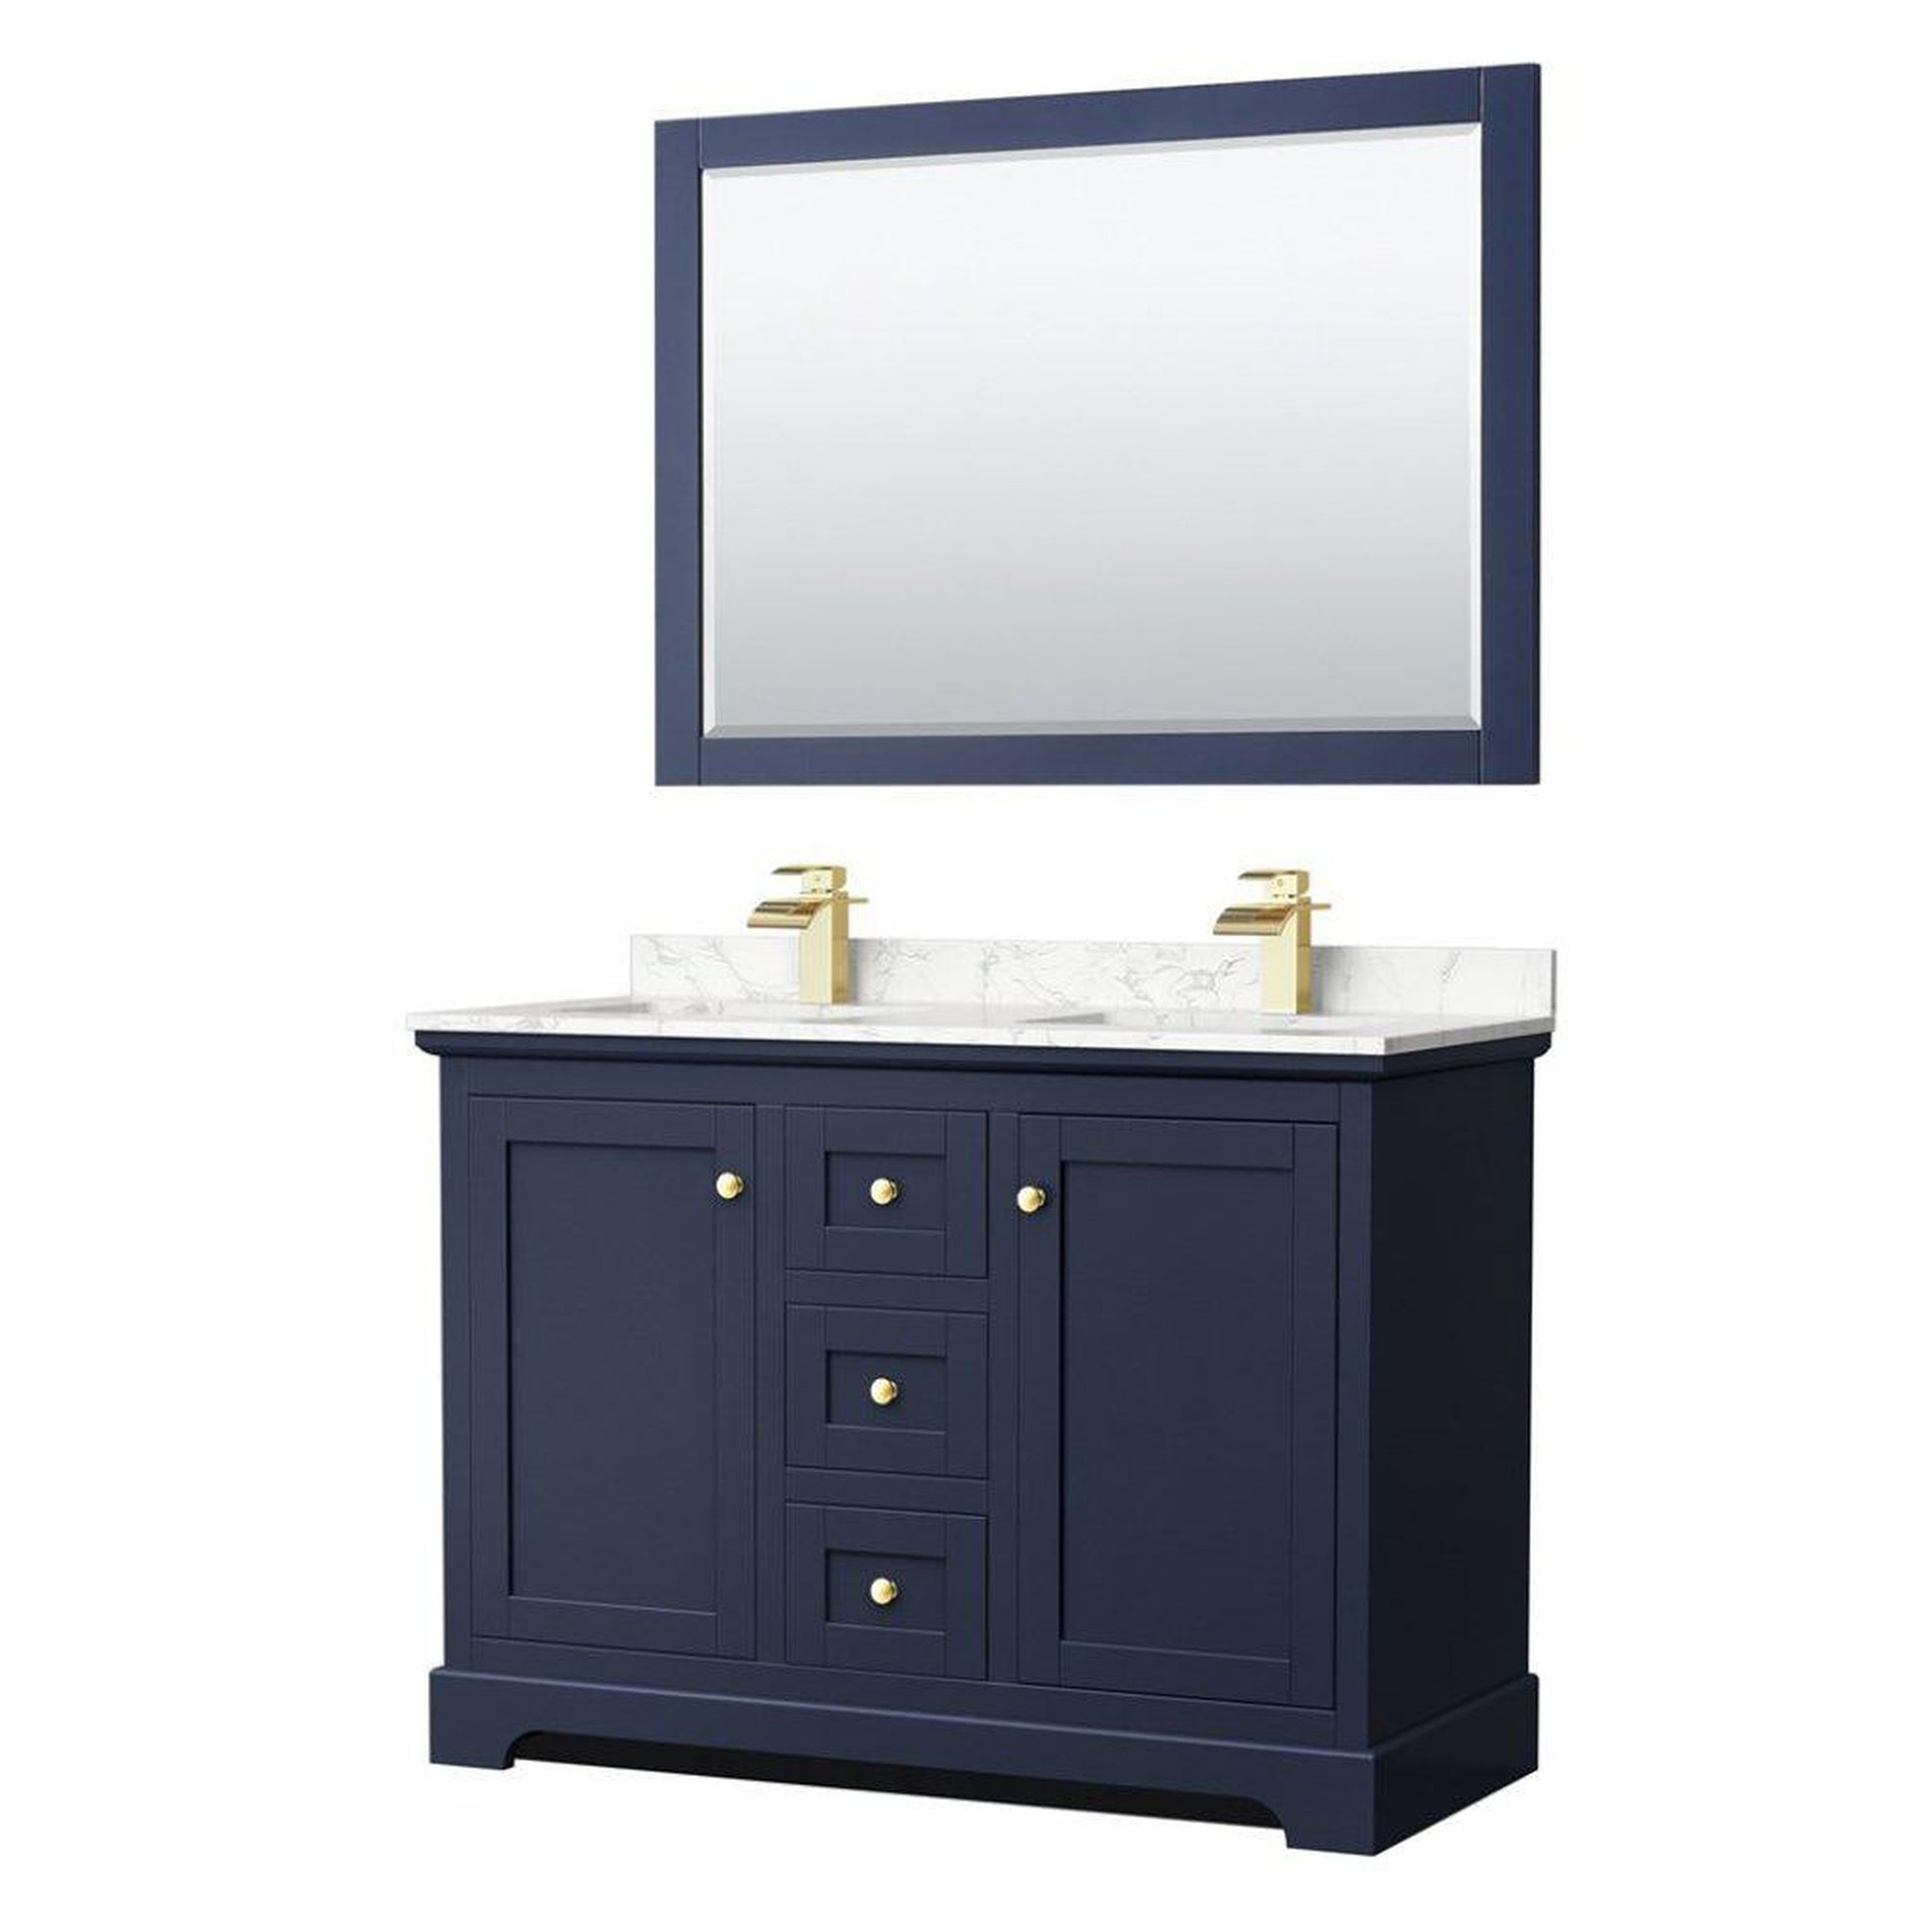 Wyndham Collection Avery 48" Dark Blue Double Bathroom Vanity Set With Dark-Vein Cultured Marble Countertop With 1-Hole Faucet And Square Sink And 46" Mirror